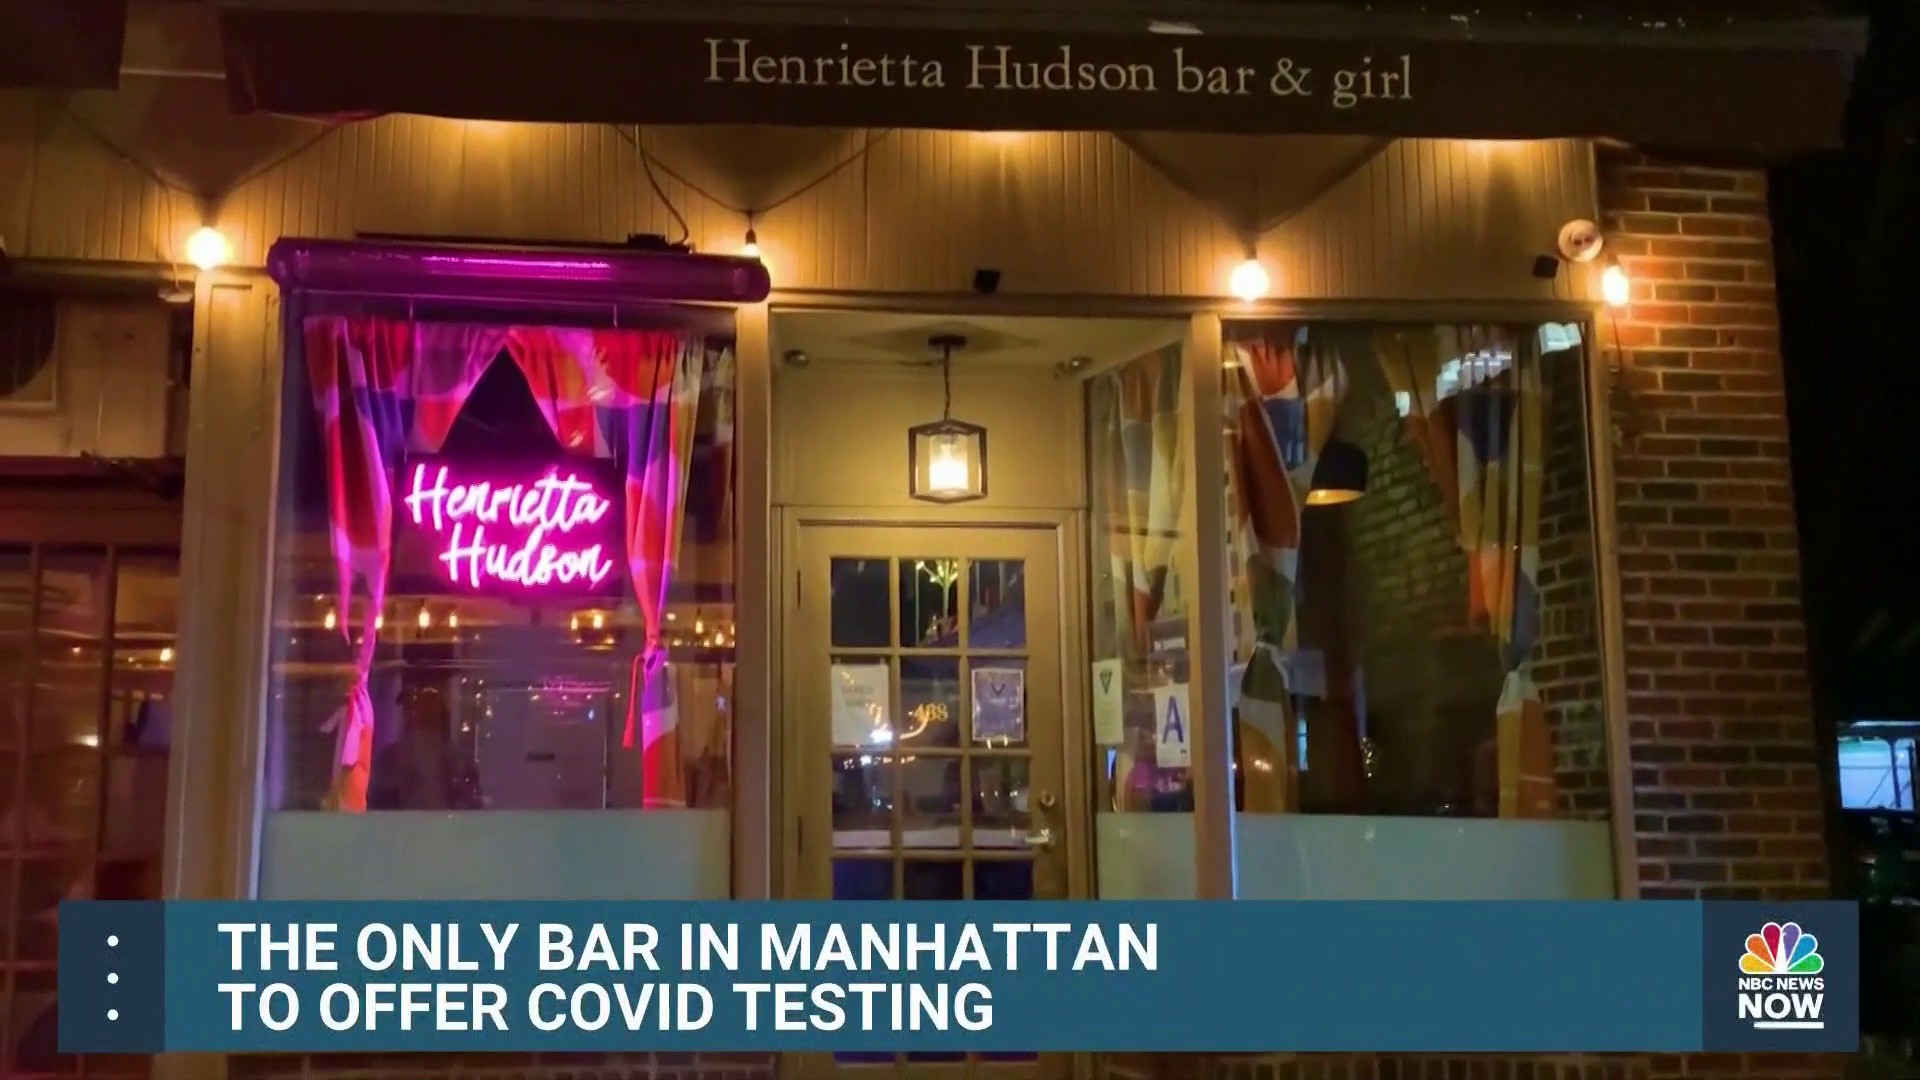 NBC News NOW on X: In NYC, stop by the Henrietta Hudson bar for a